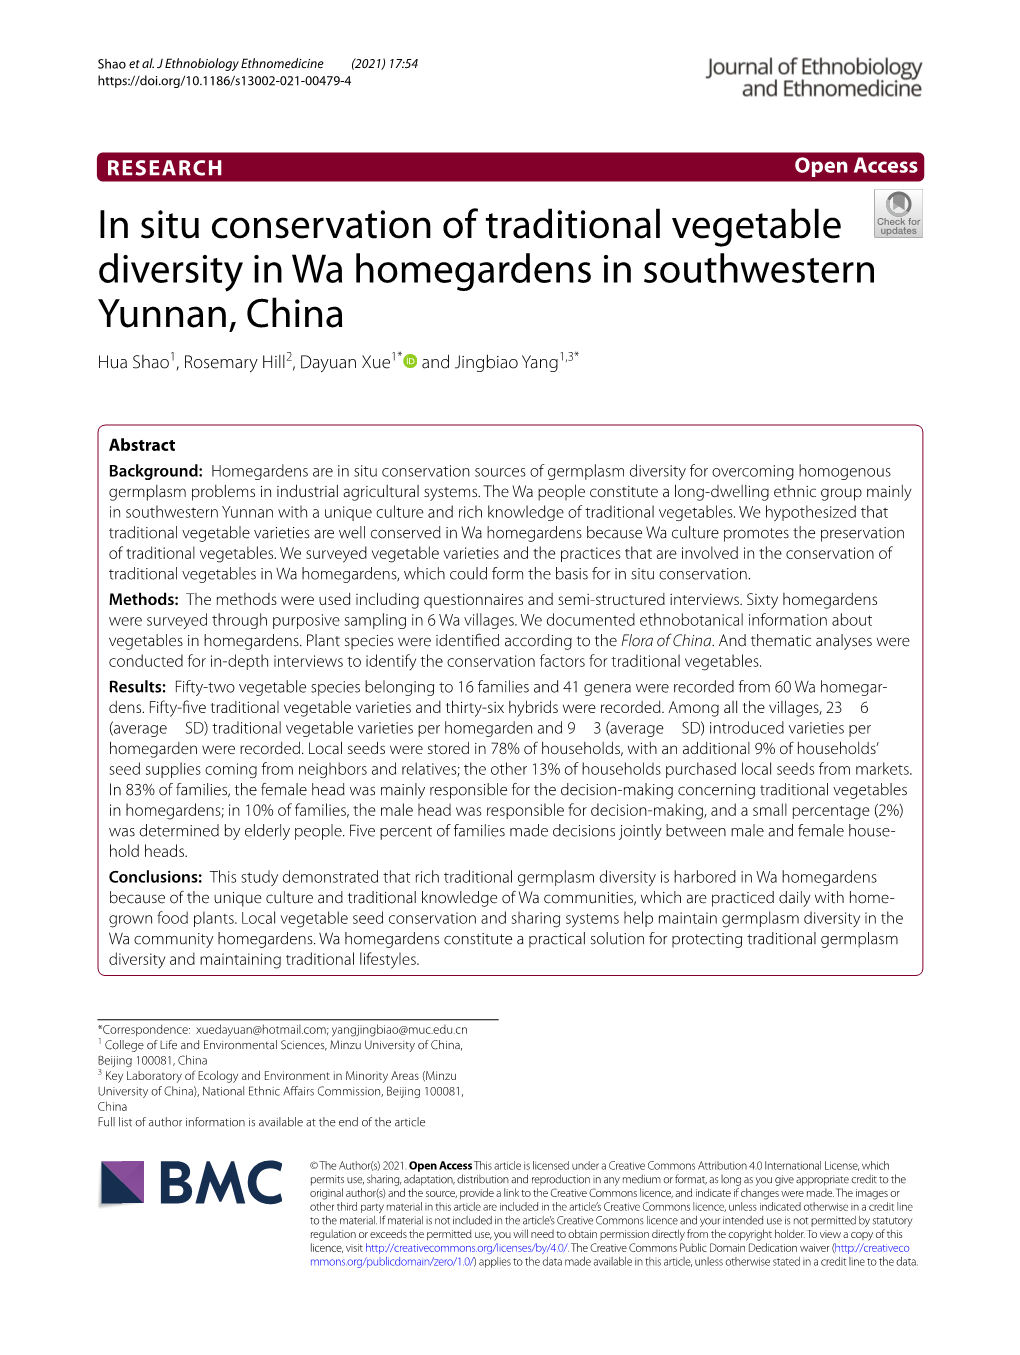 In Situ Conservation of Traditional Vegetable Diversity in Wa Homegardens in Southwestern Yunnan, China Hua Shao1, Rosemary Hill2, Dayuan Xue1* and Jingbiao Yang1,3*